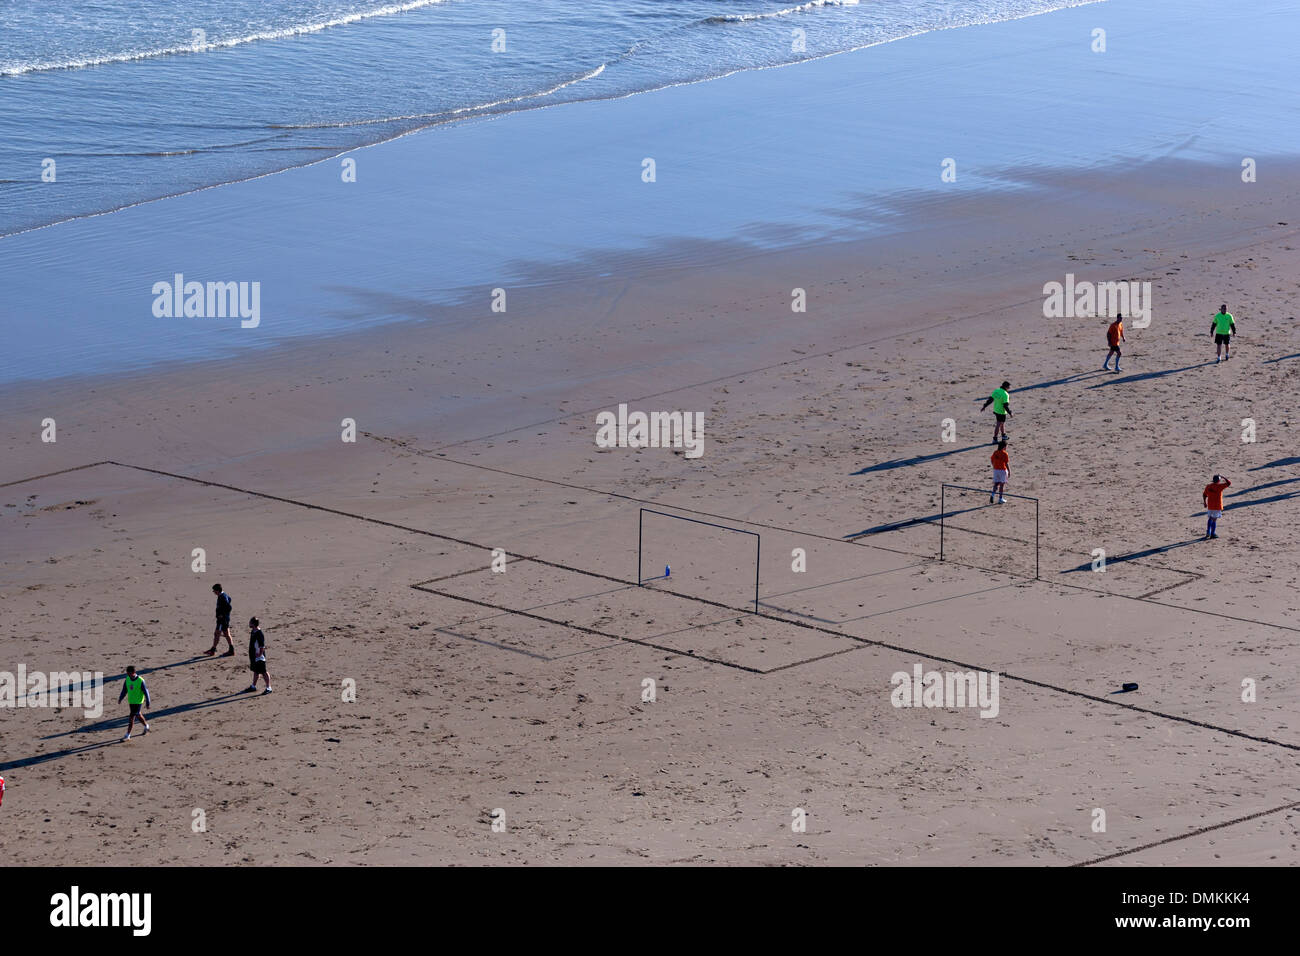 Two football match at the same time in La Concha beach, Suances Cantabria. Stock Photo